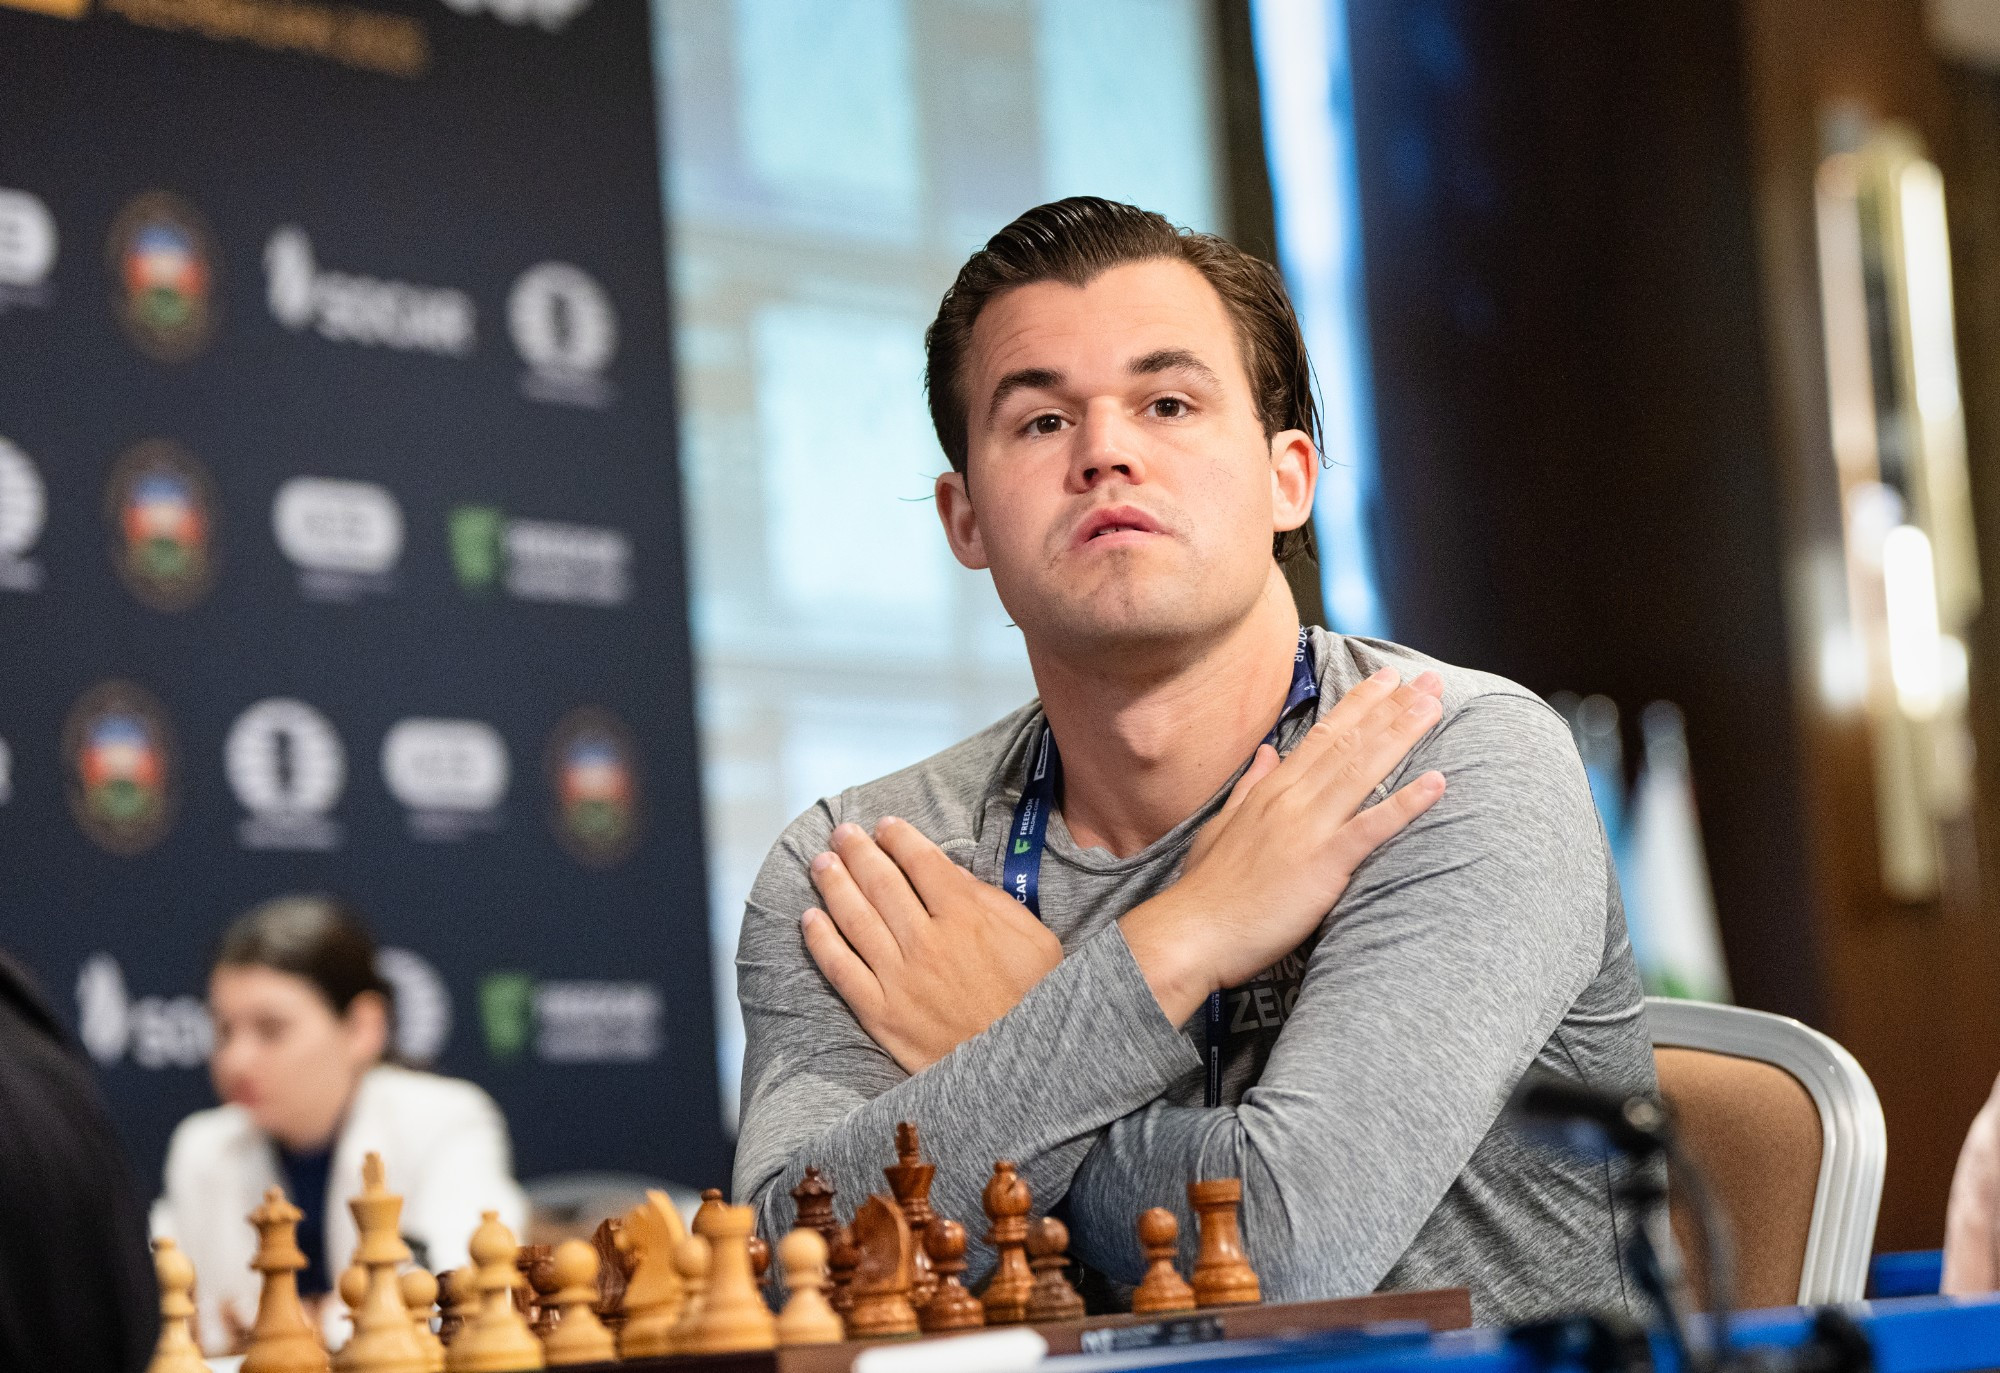 Carlsen cruises to victory while Ju is held up at FIDE World Cup in Baku